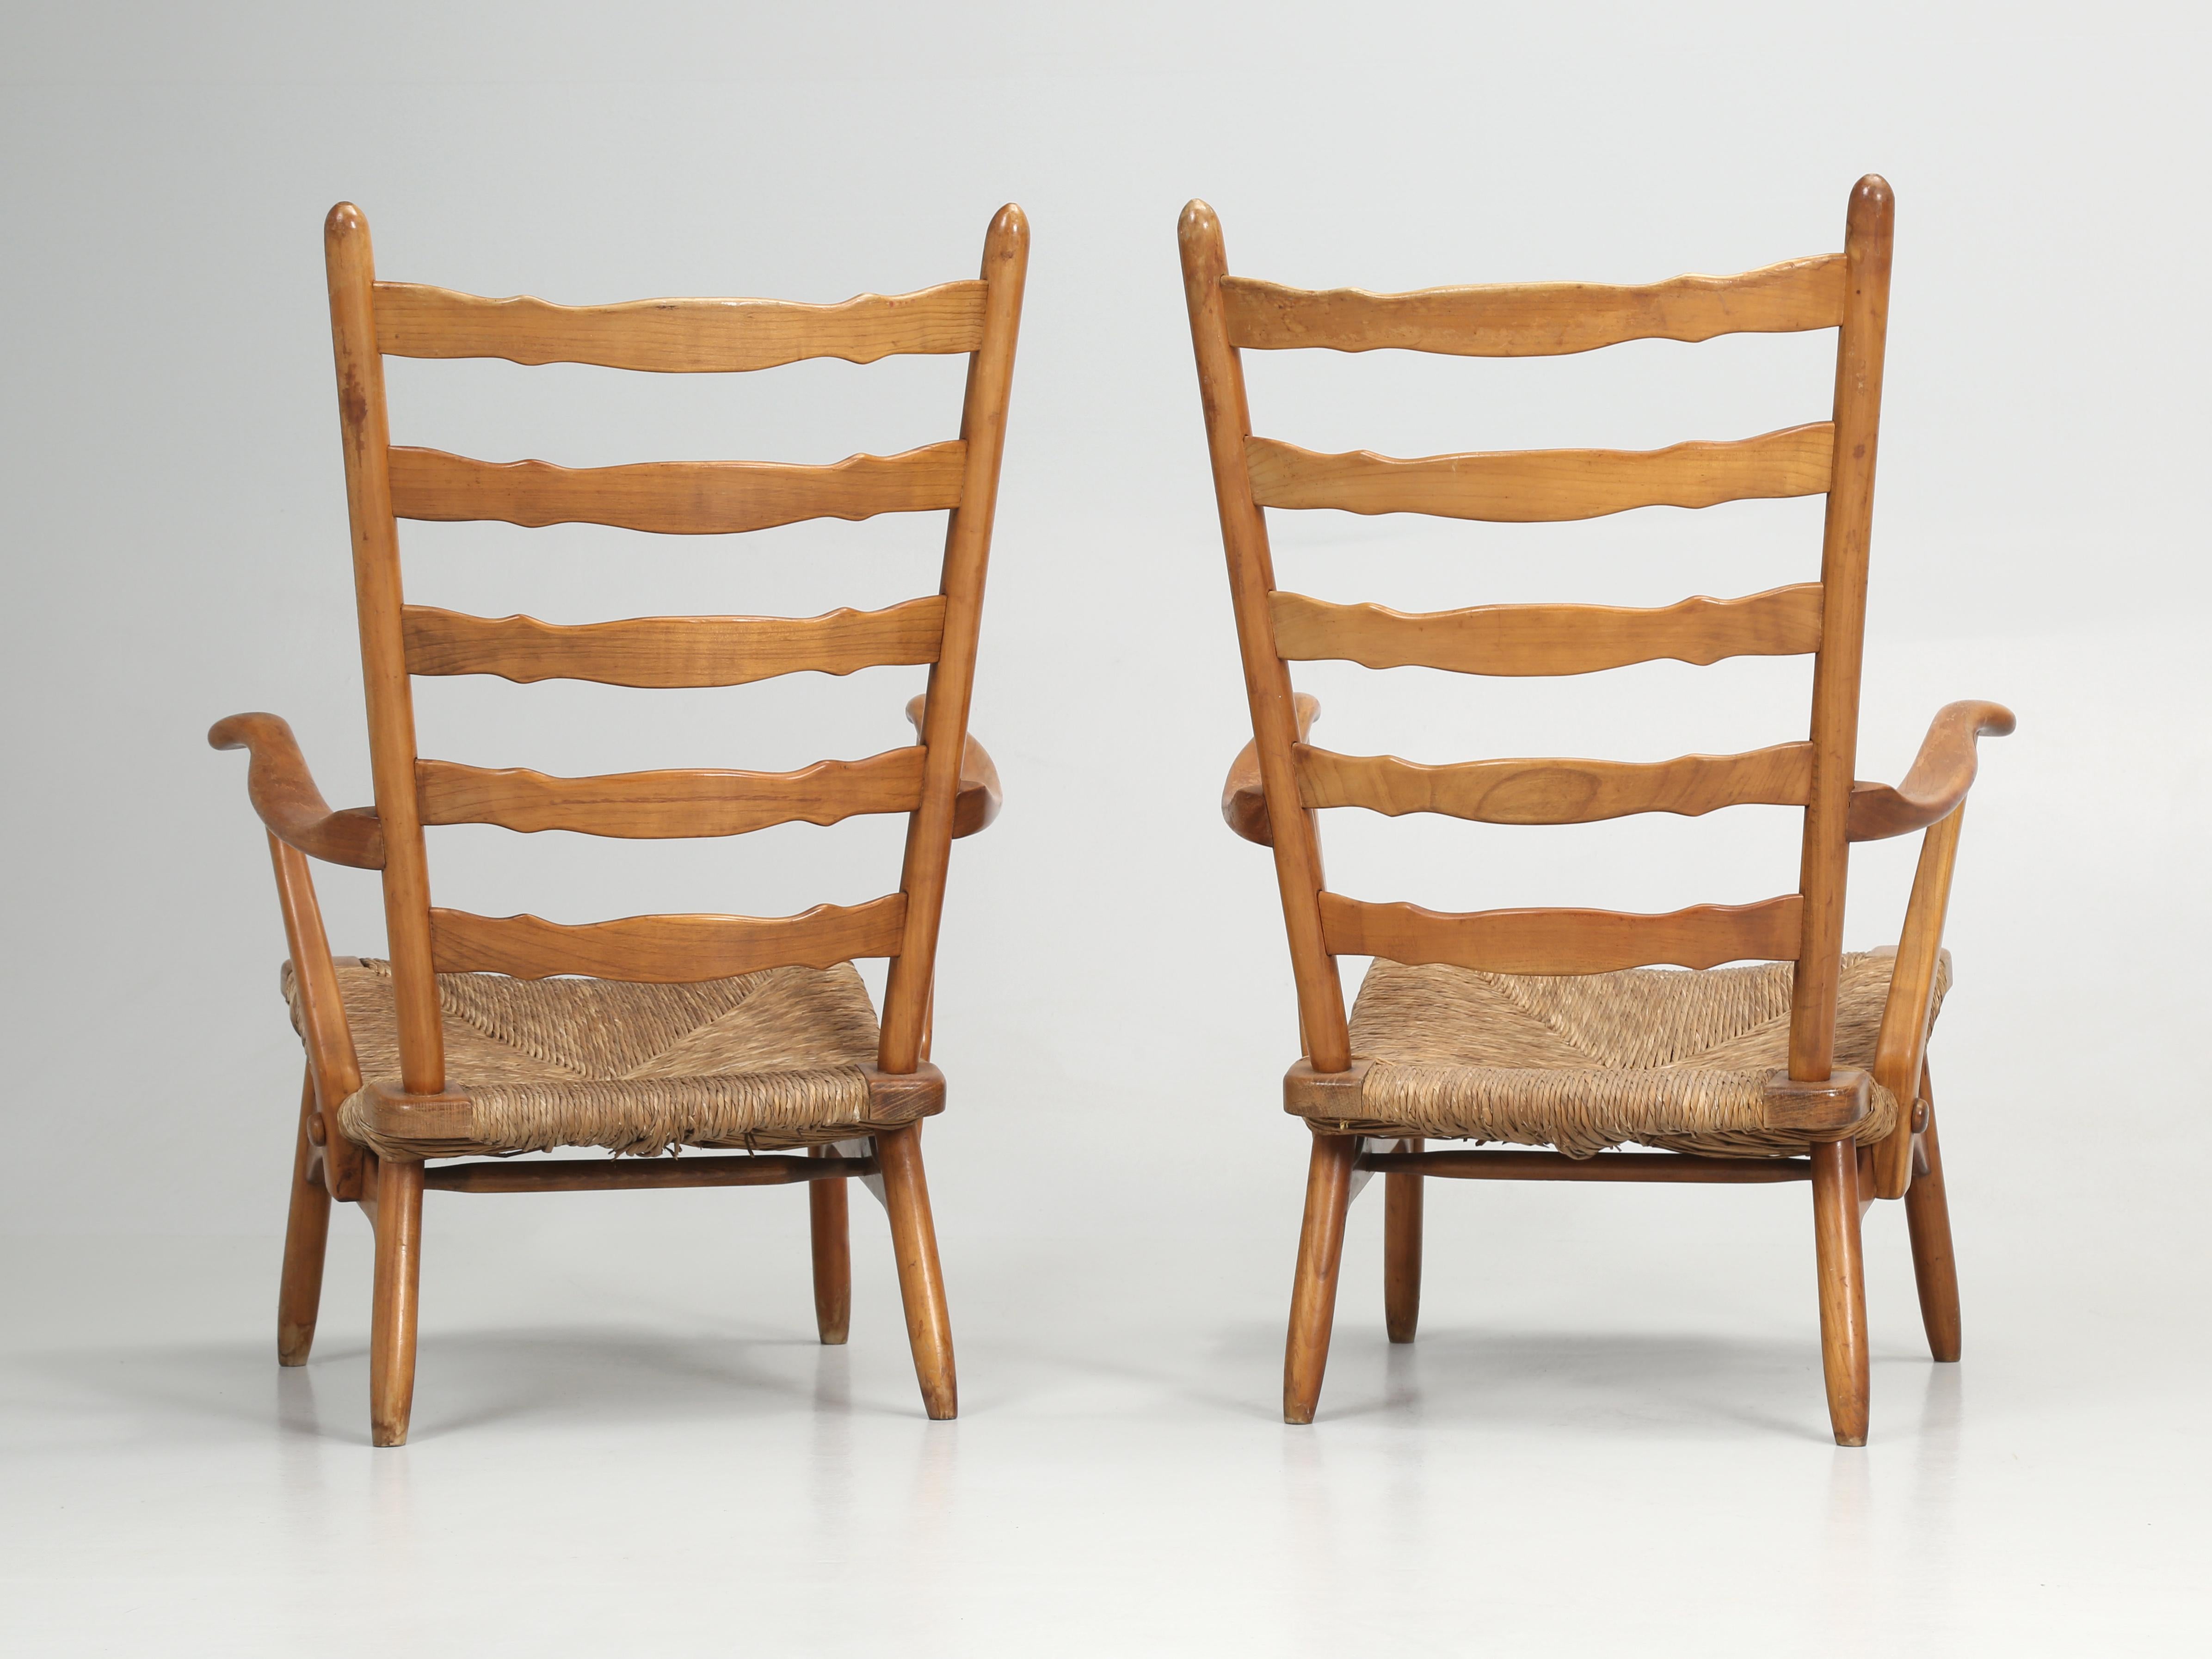 Scandinavian Mid-Century Modern Pair of Chairs Unrestored Condition, circa 1960s For Sale 8